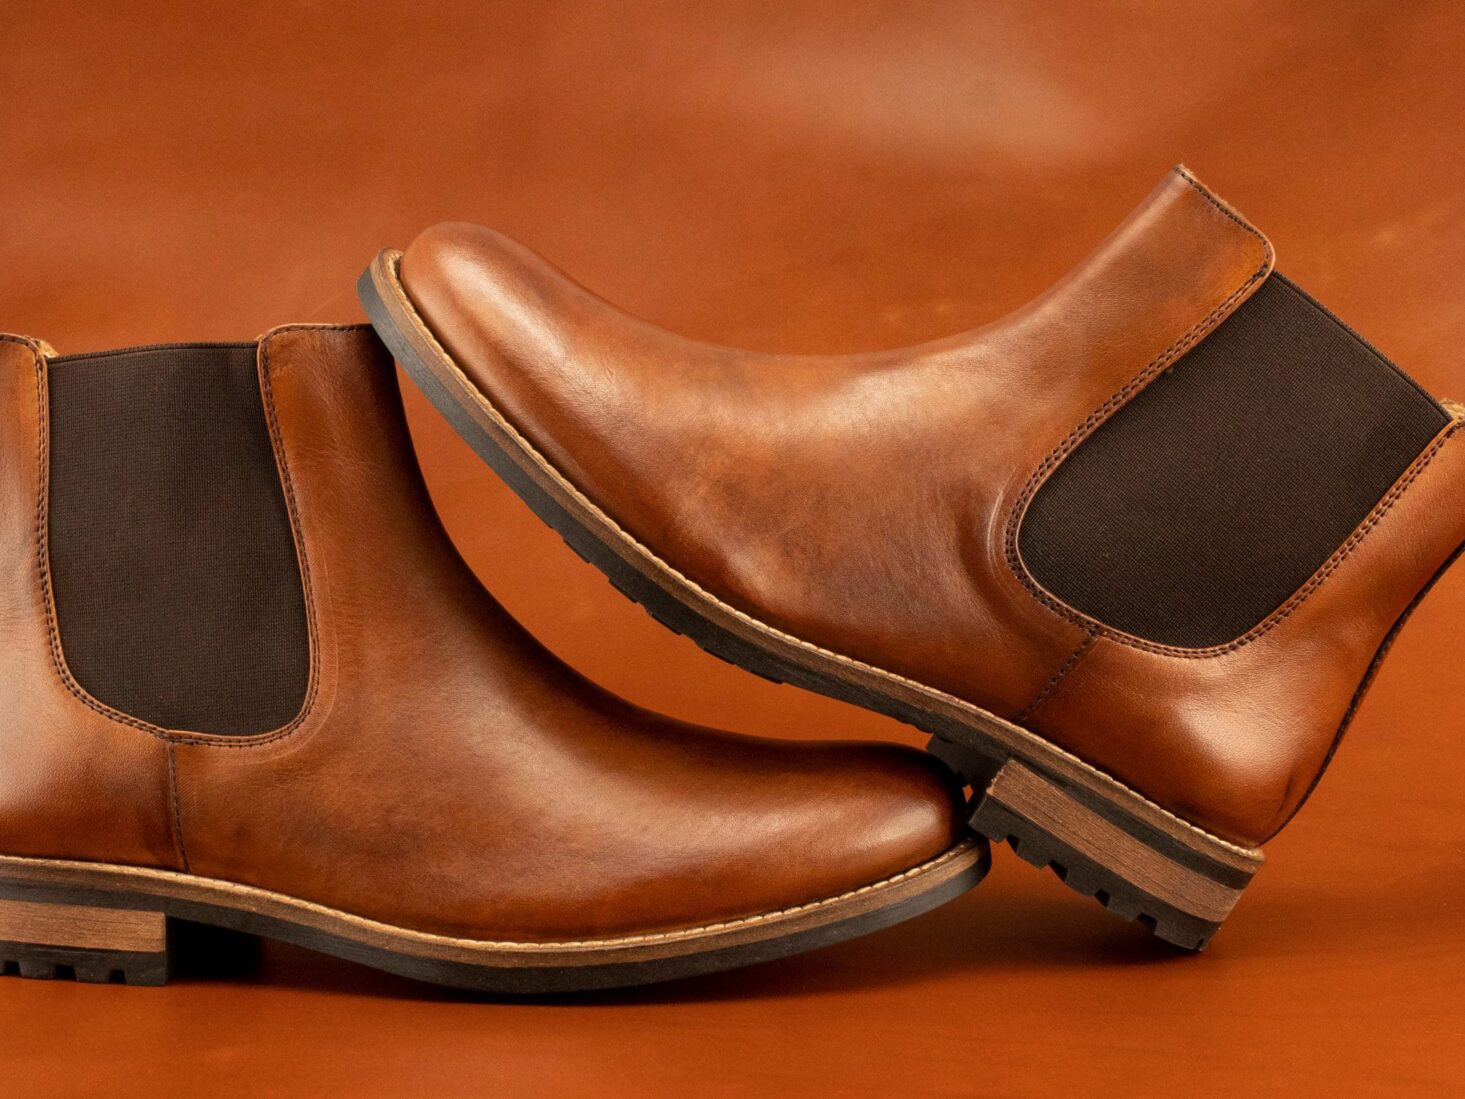 The Chelsea boots for men – Luxury London